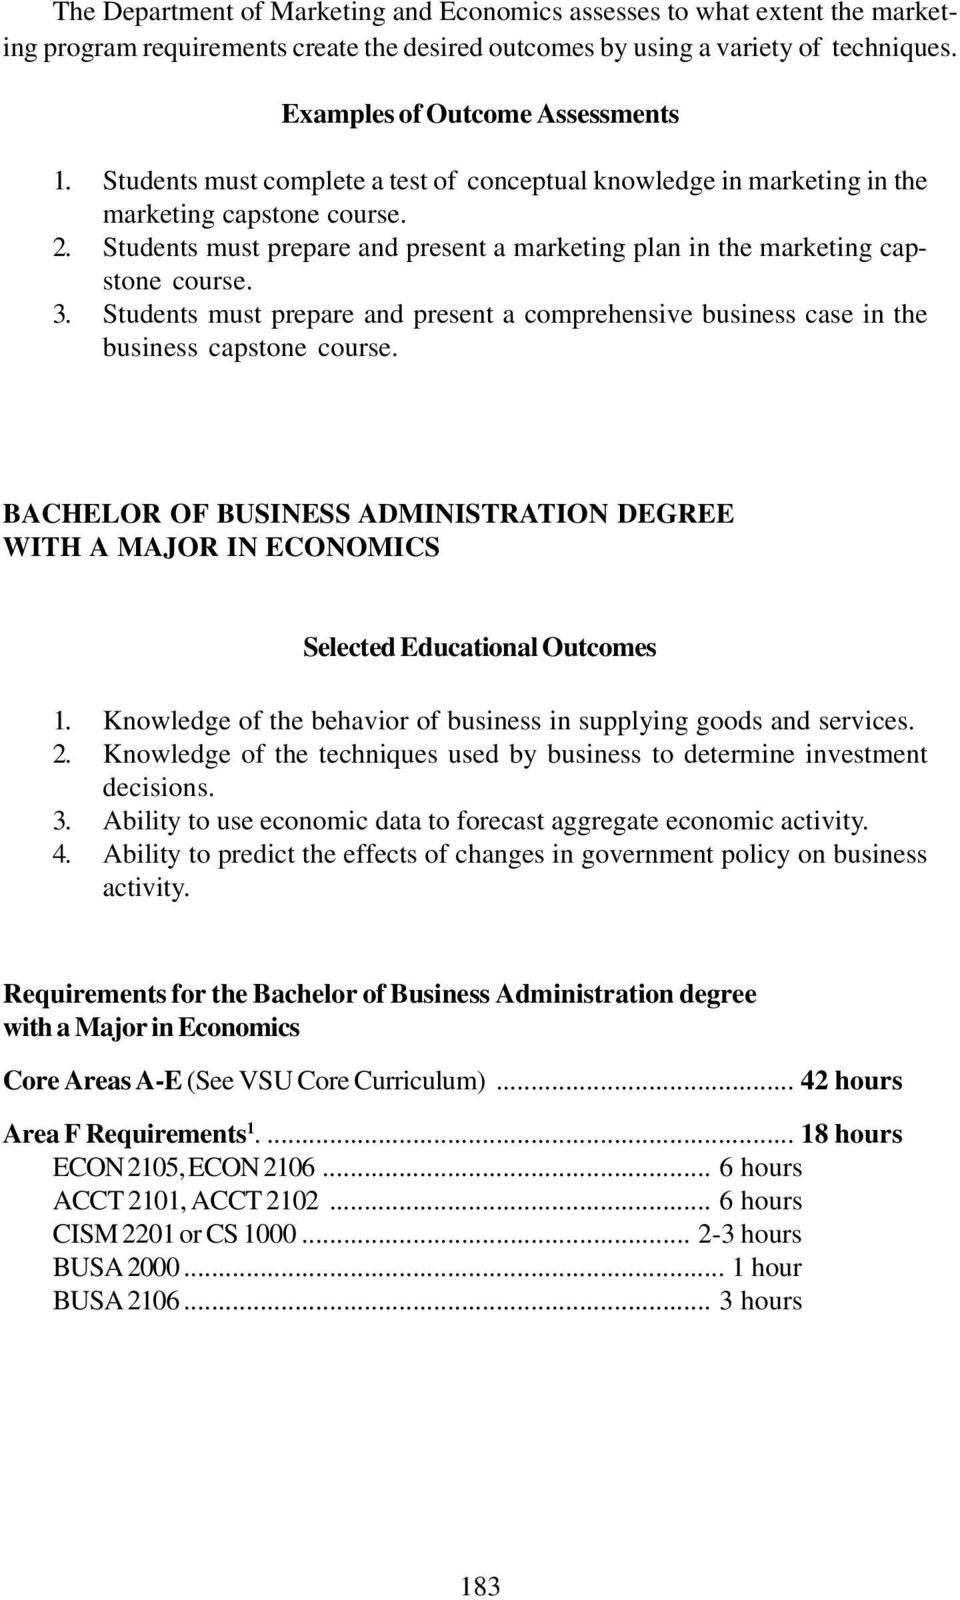 Students must prepare and present a comprehensive business case in the business capstone course. BACHELOR OF BUSINESS ADMINISTRATION DEGREE WITH A MAJOR IN ECONOMICS Selected Educational Outcomes 1.